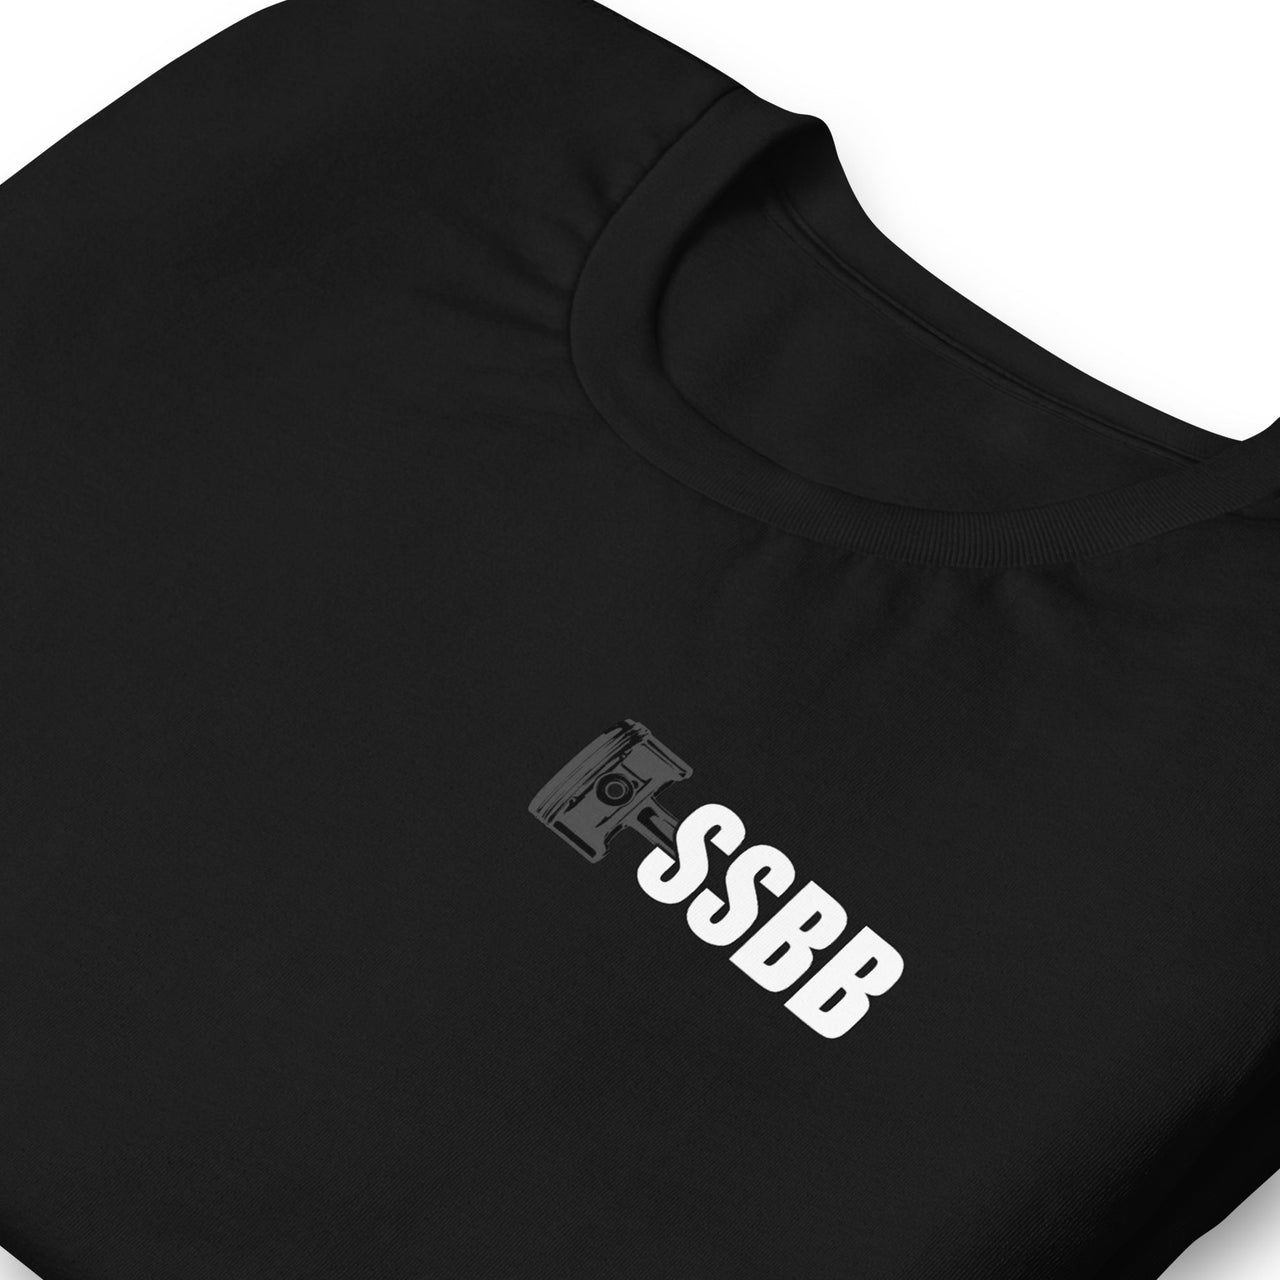 funny mechanic tshirt SSBB in black - close up of front print